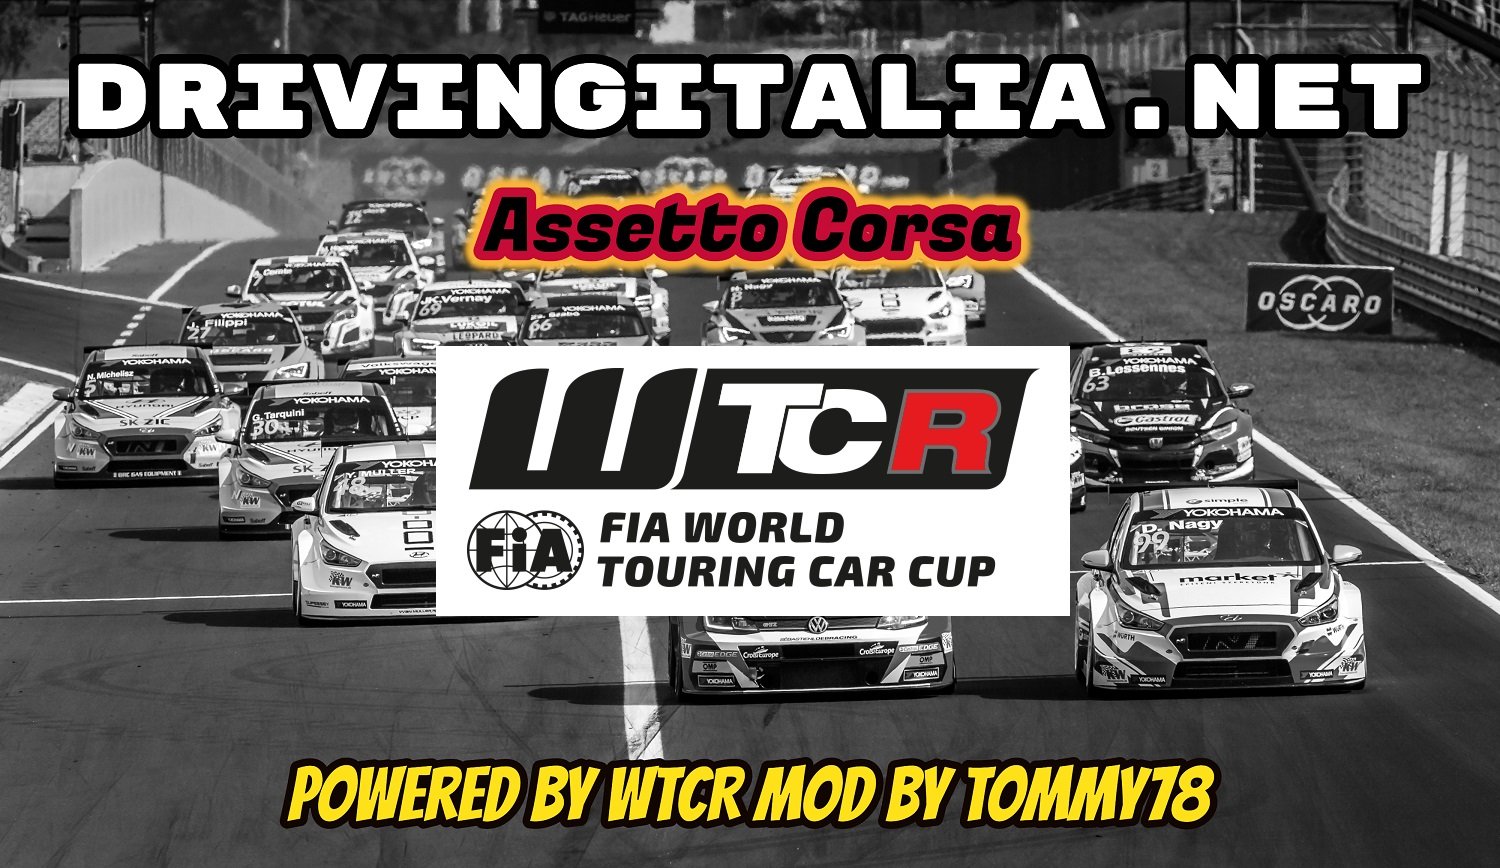 More information about "Assetto Corsa: WTCR World Touring Car Cup by DrivingItalia.NET !"